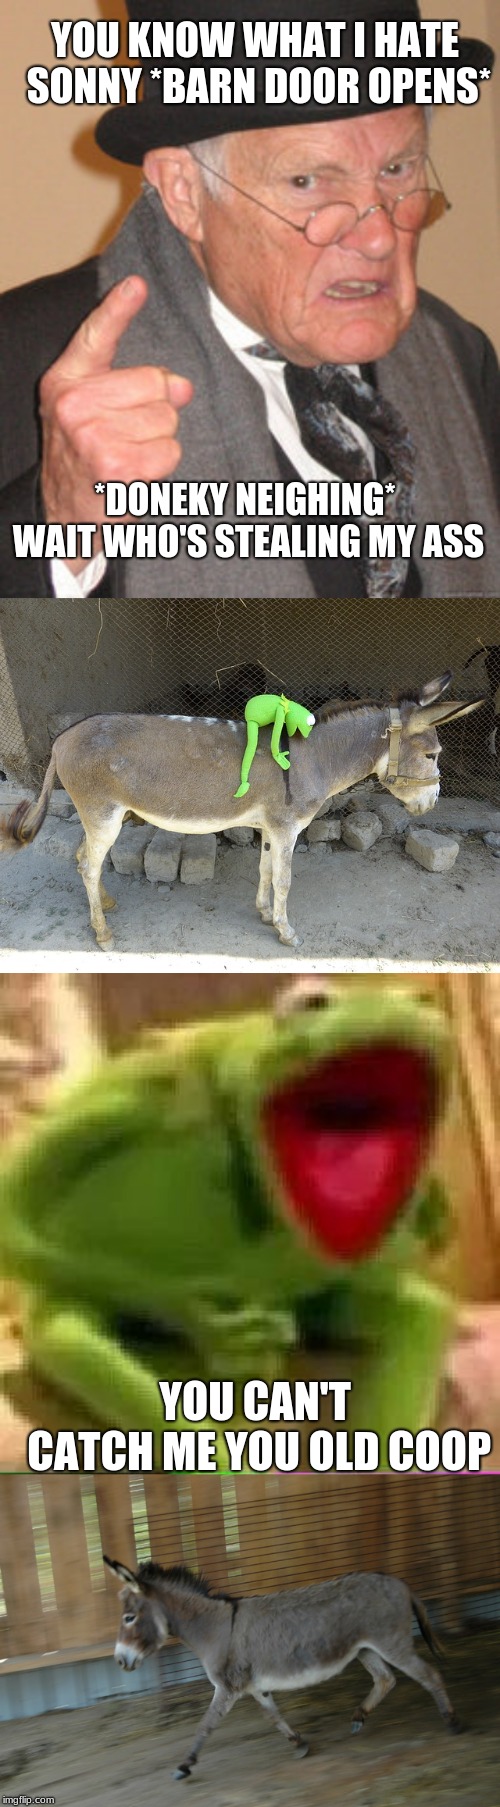 I felt bored so... | YOU KNOW WHAT I HATE SONNY *BARN DOOR OPENS*; *DONEKY NEIGHING* WAIT WHO'S STEALING MY ASS; YOU CAN'T CATCH ME YOU OLD COOP | image tagged in memes,back in my day,kermit the frog,stealing an ass | made w/ Imgflip meme maker